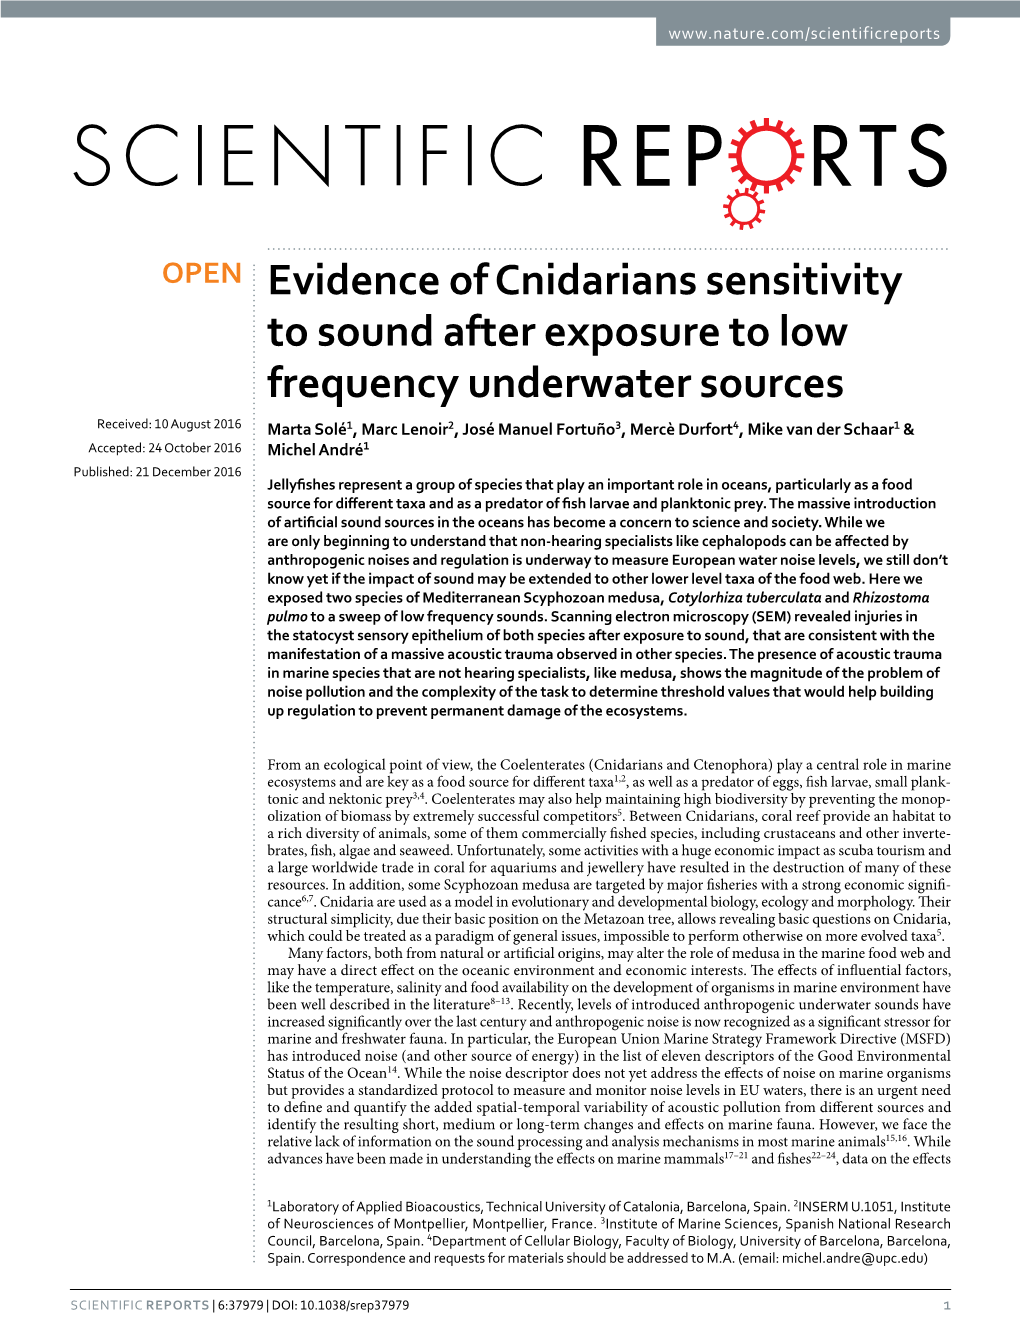 Evidence of Cnidarians Sensitivity to Sound After Exposure to Low